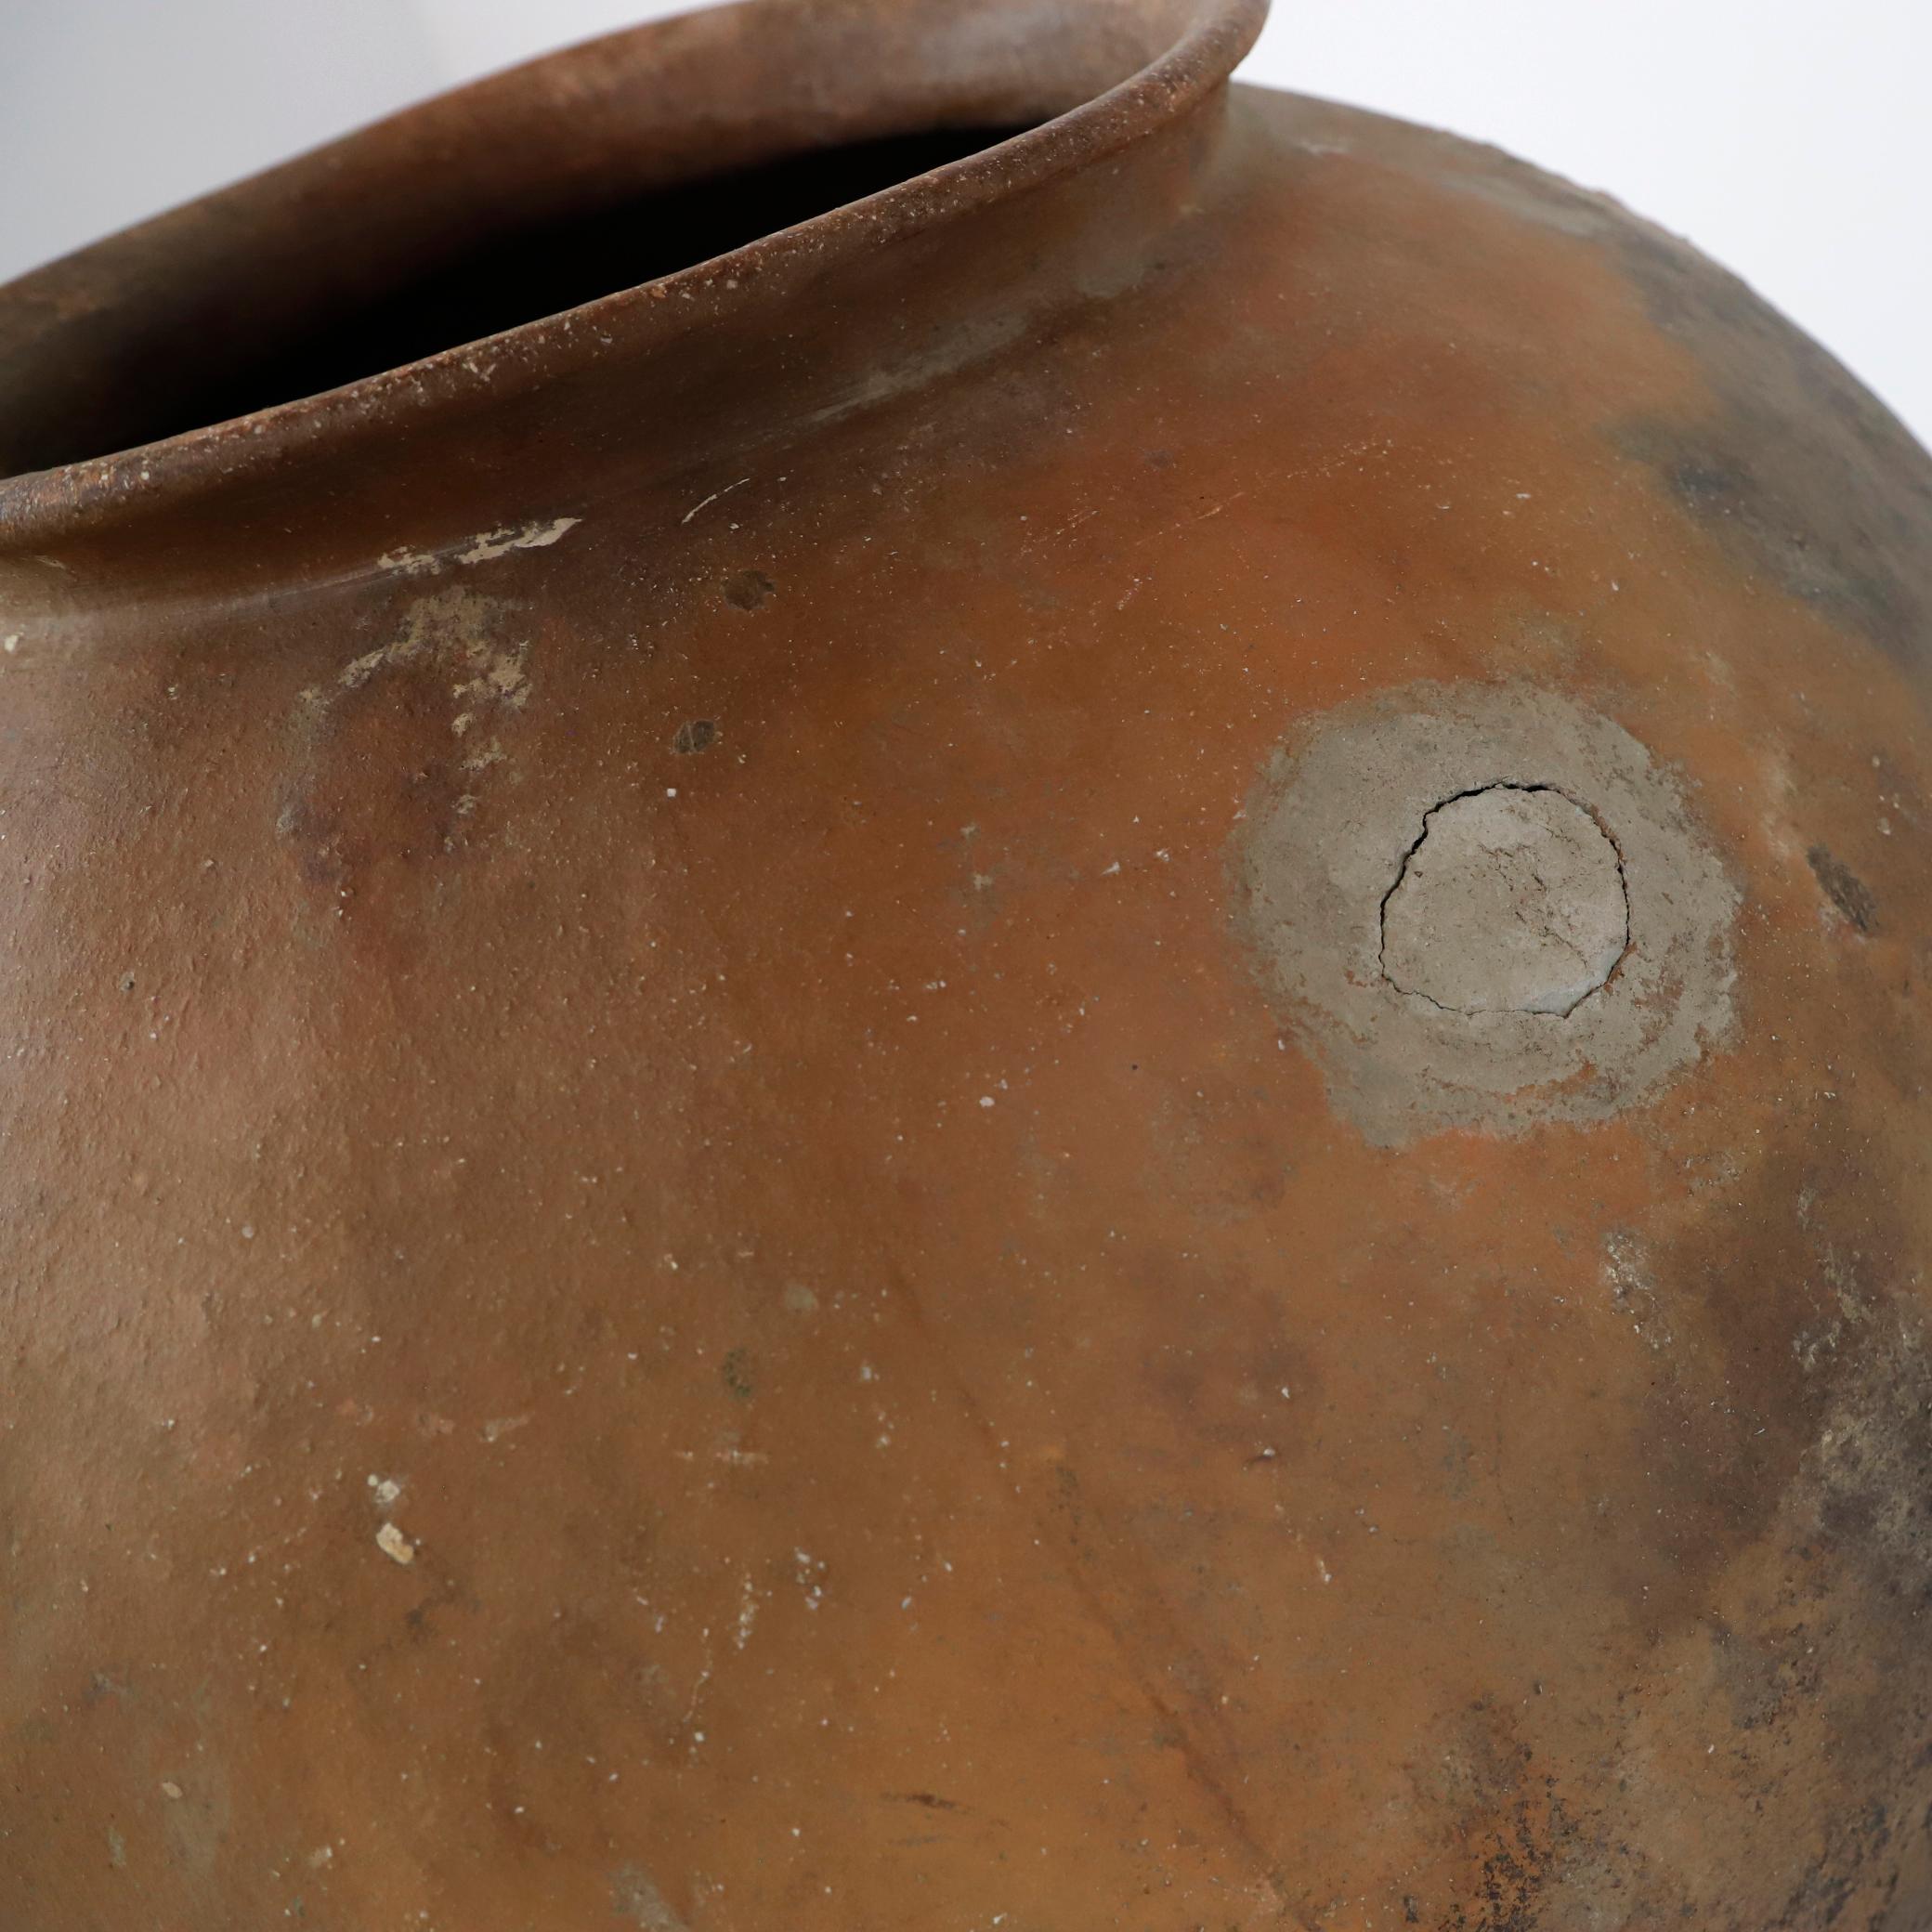 Circa 1940, we offer this fantastic ancient barro pot from Mexico, made in Puebla México hand crafted . This style of pottery is very rare, originally used for storing water from nearby rivers. The pot present some details and restaurations.